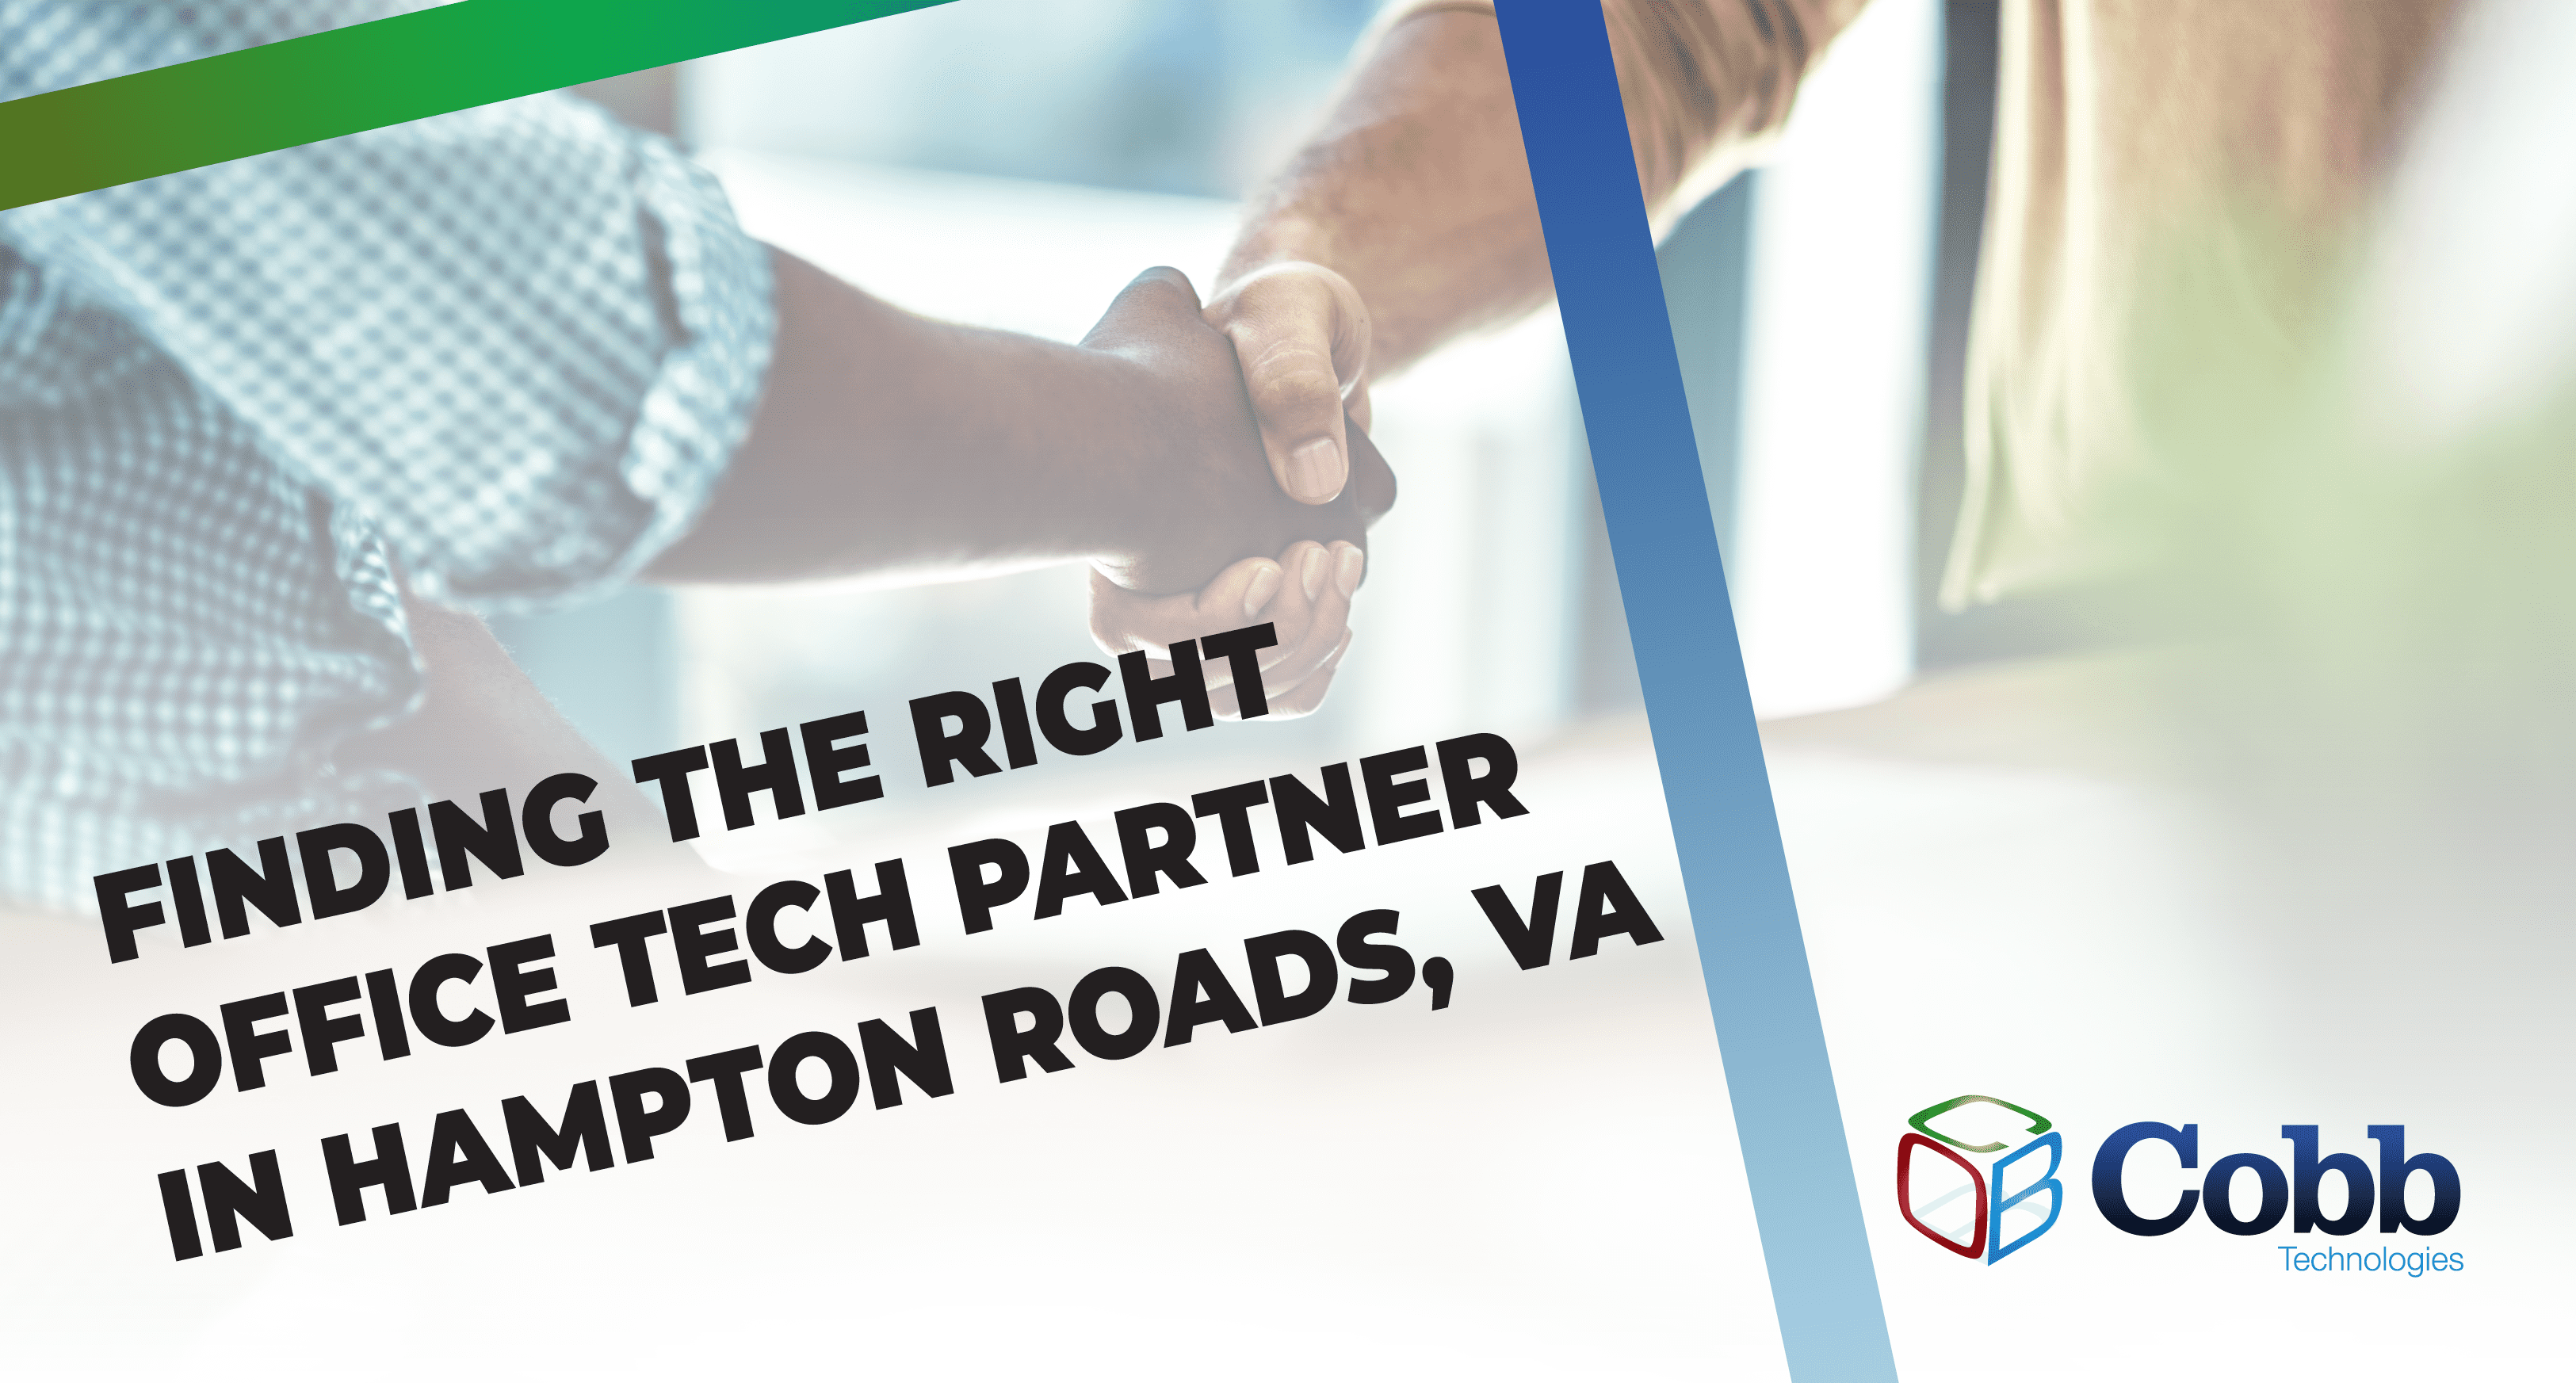 Finding the Right Office Technology Partner in Hampton Roads